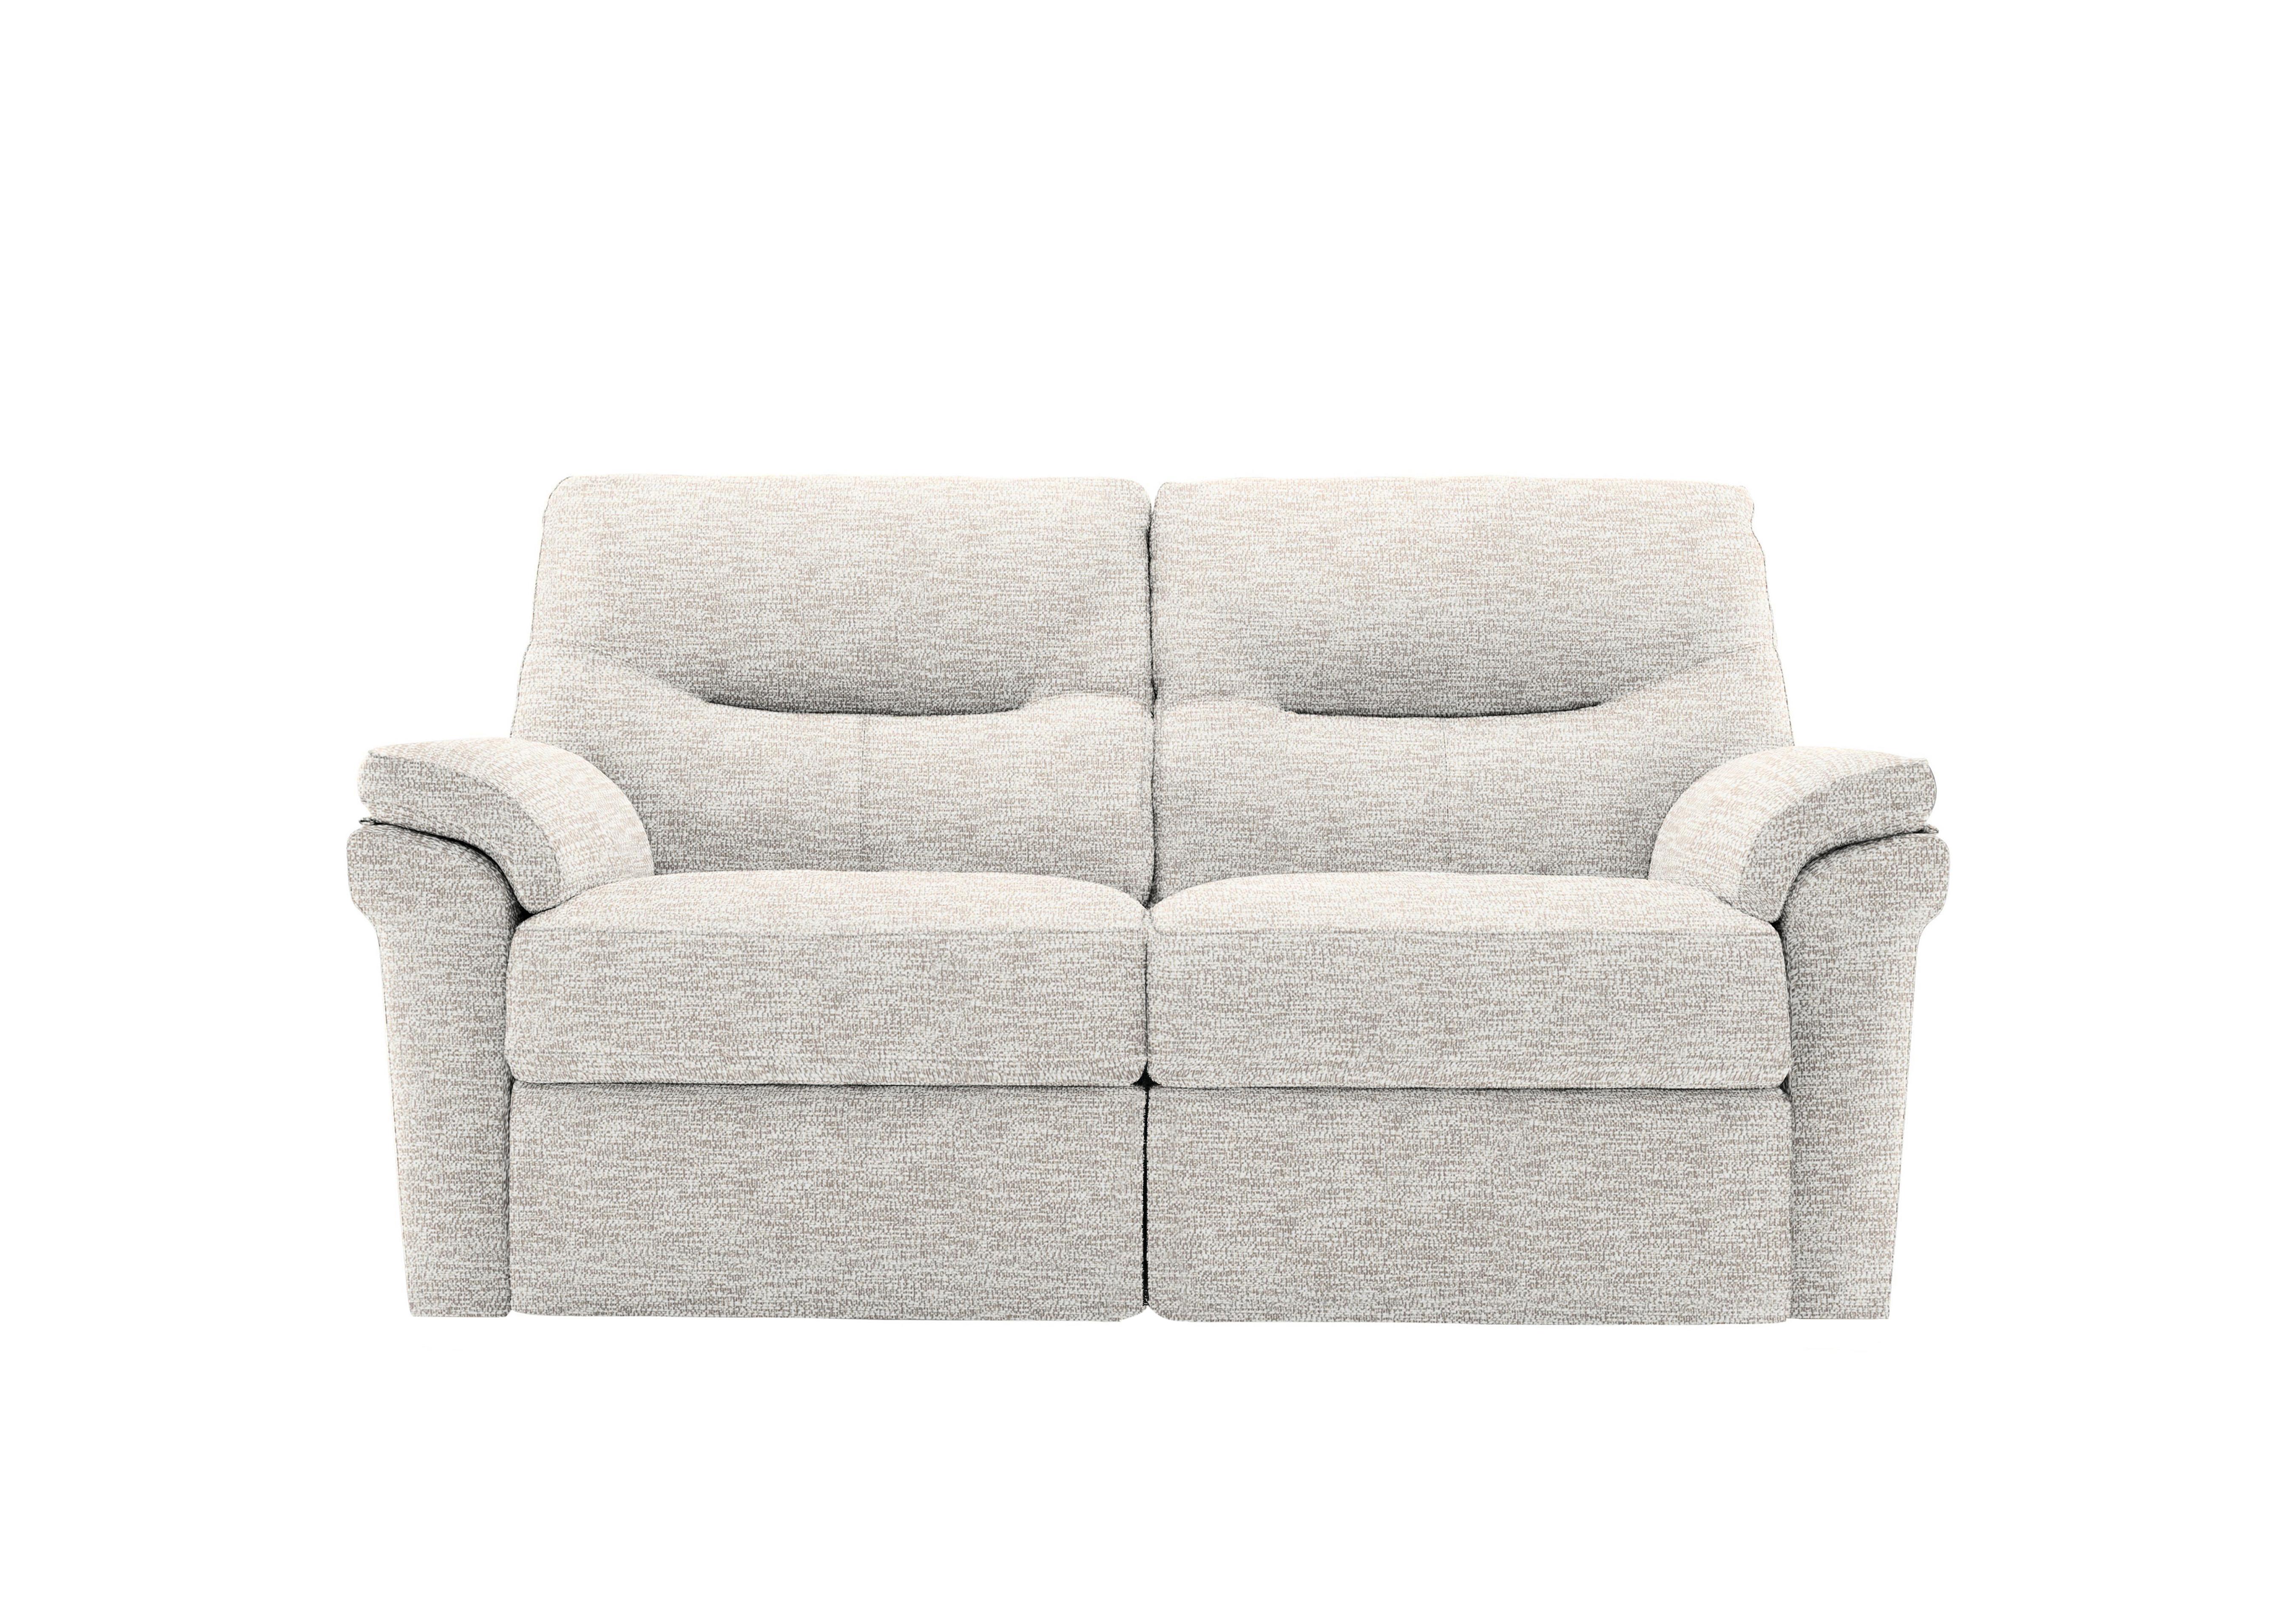 Seattle 2 Seater Fabric Power Recliner Sofa with Power Lumbar in C931 Rush Cream on Furniture Village